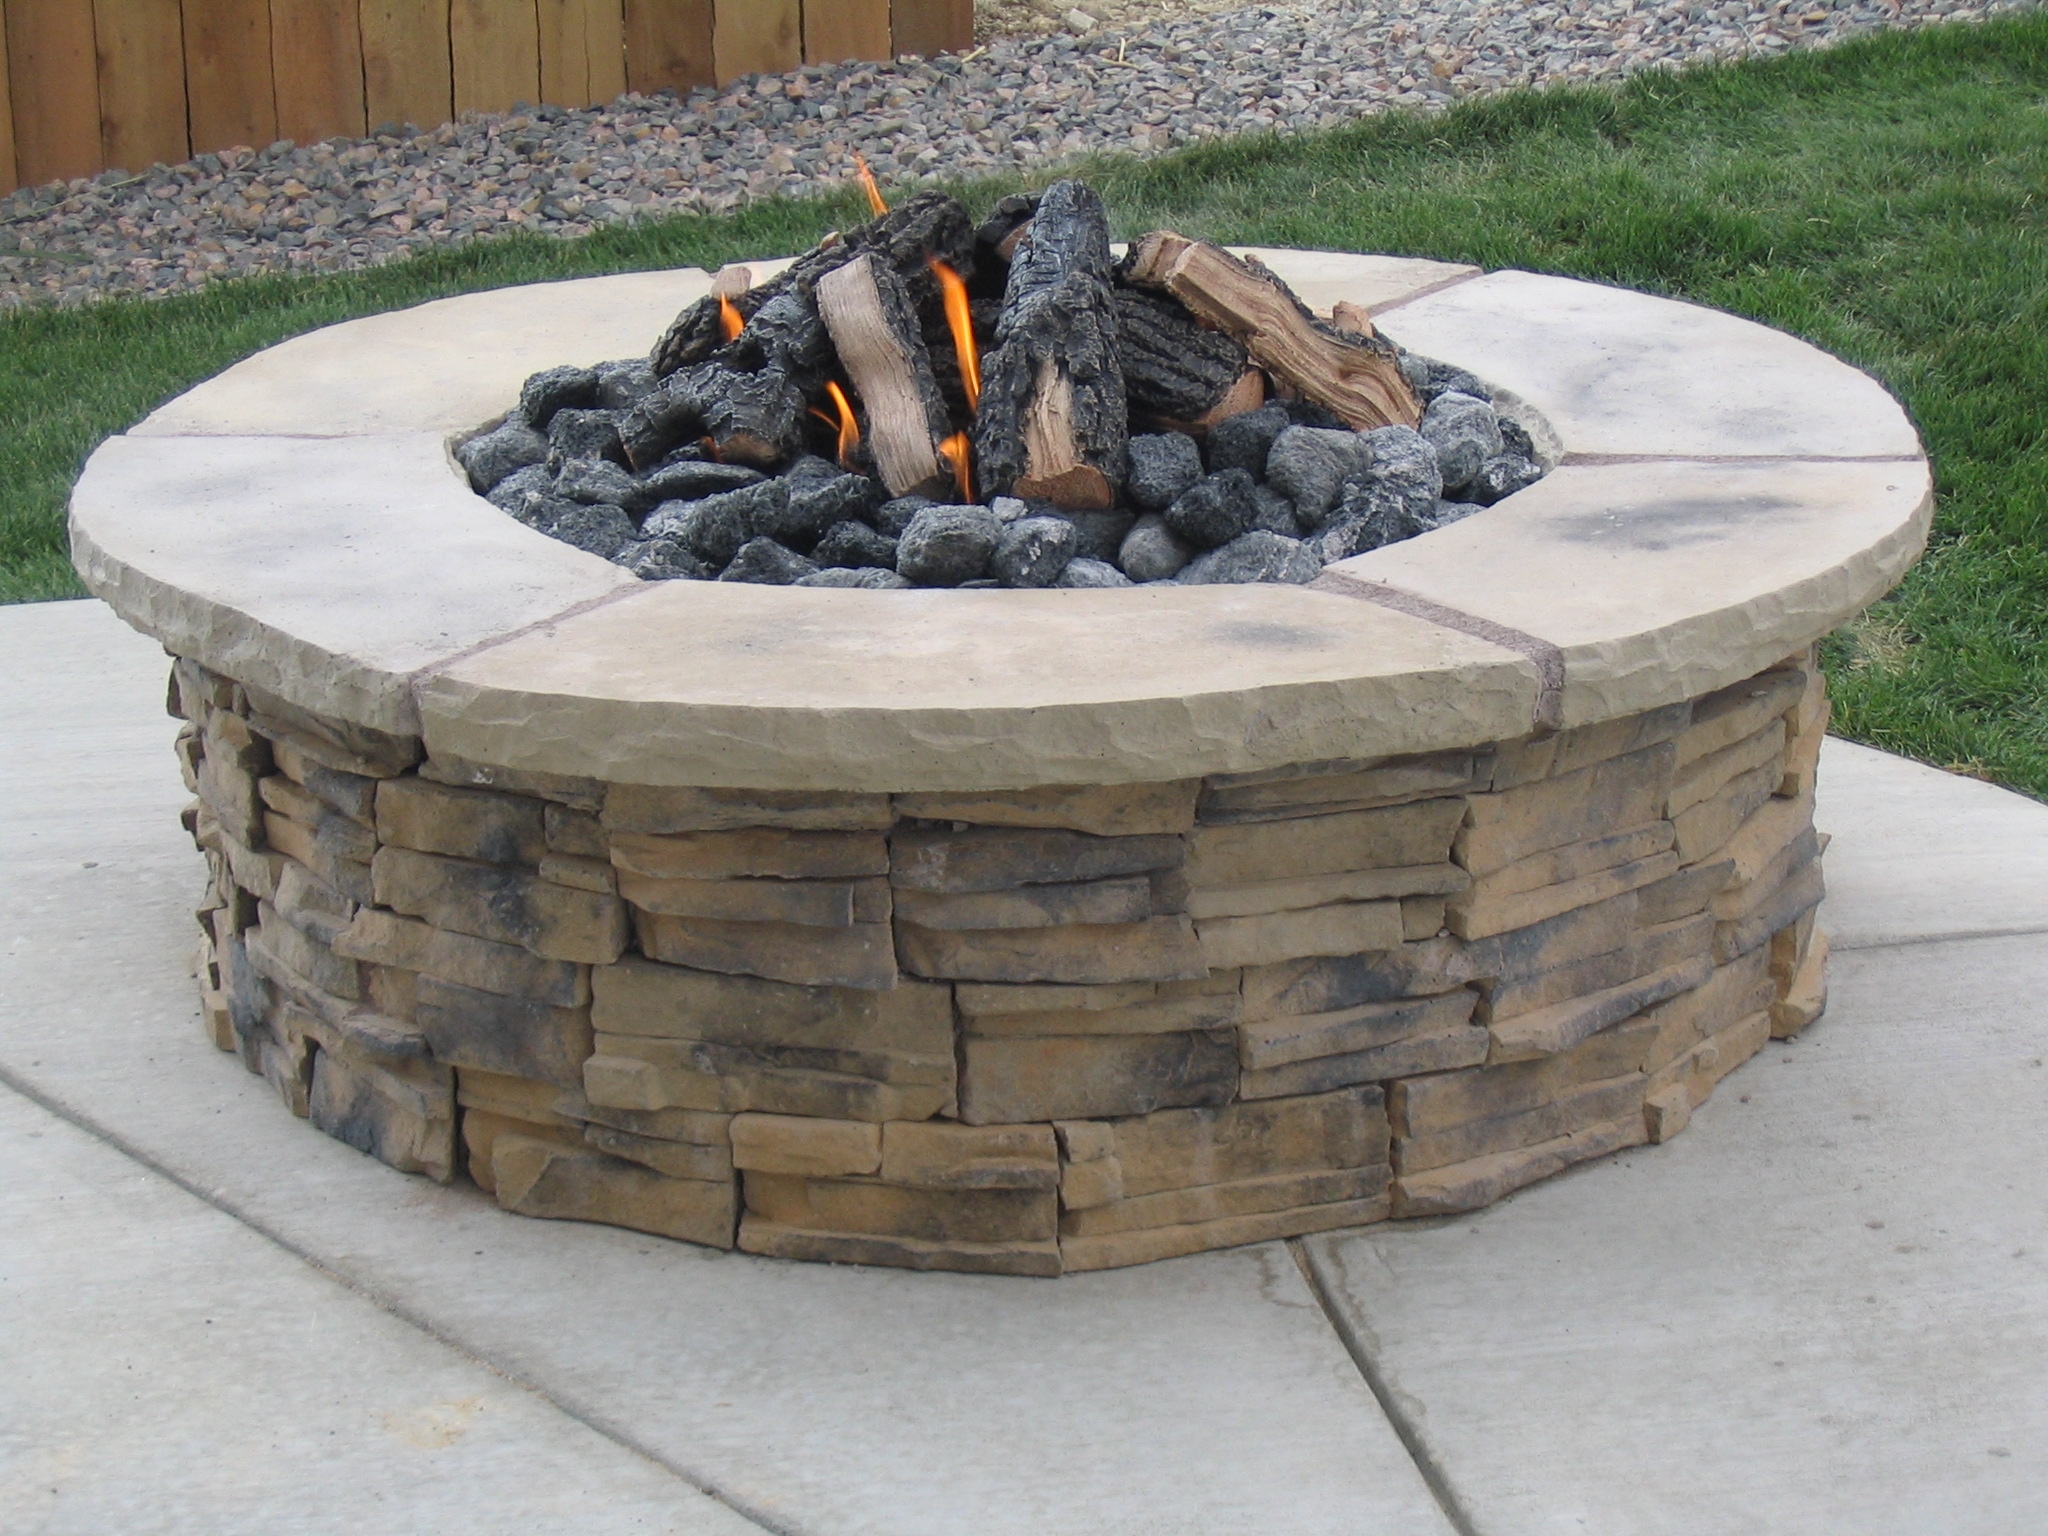 Outdoor Wood Burning Fire Pit Kits Pavestone 40 in. w x 14 in. h rockwall round fire pit kit